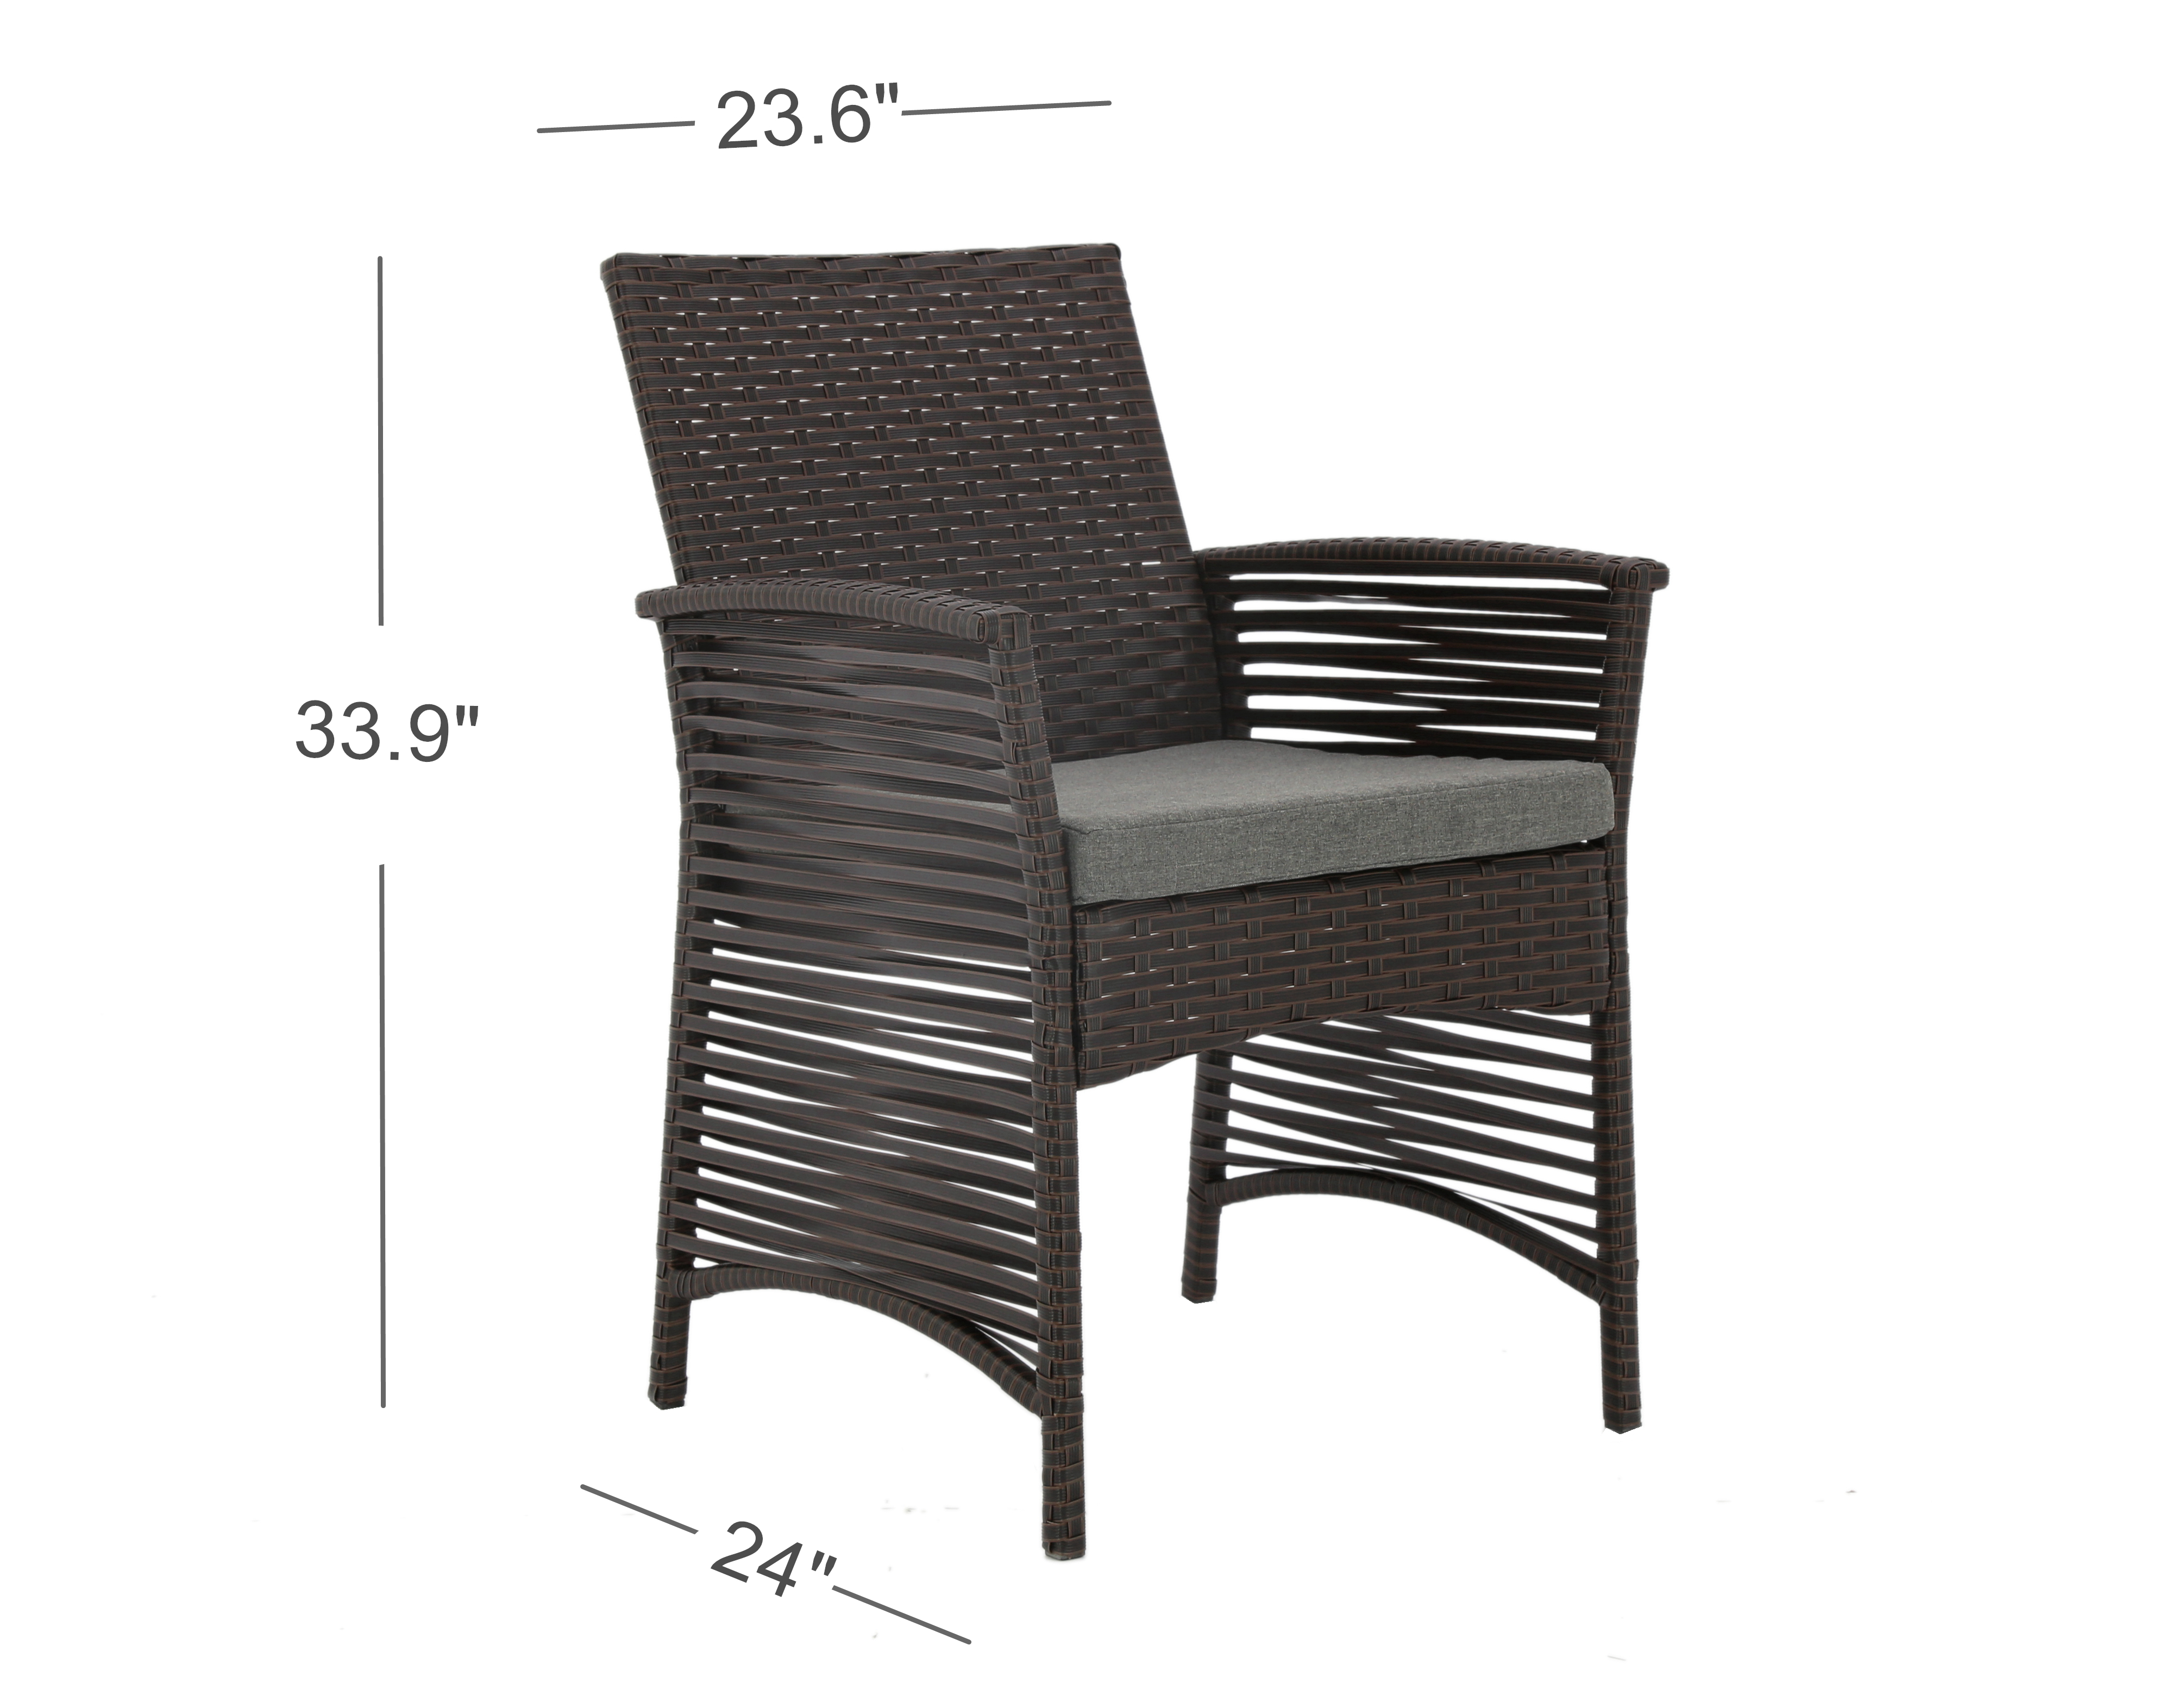 Baner Garden H13CH 3 Pieces Outdoor Patio Backyard Steel Frame Sofa Set Rattan Furniture Two Chairs and One Square Table with Cushions, Chocolate - image 3 of 5